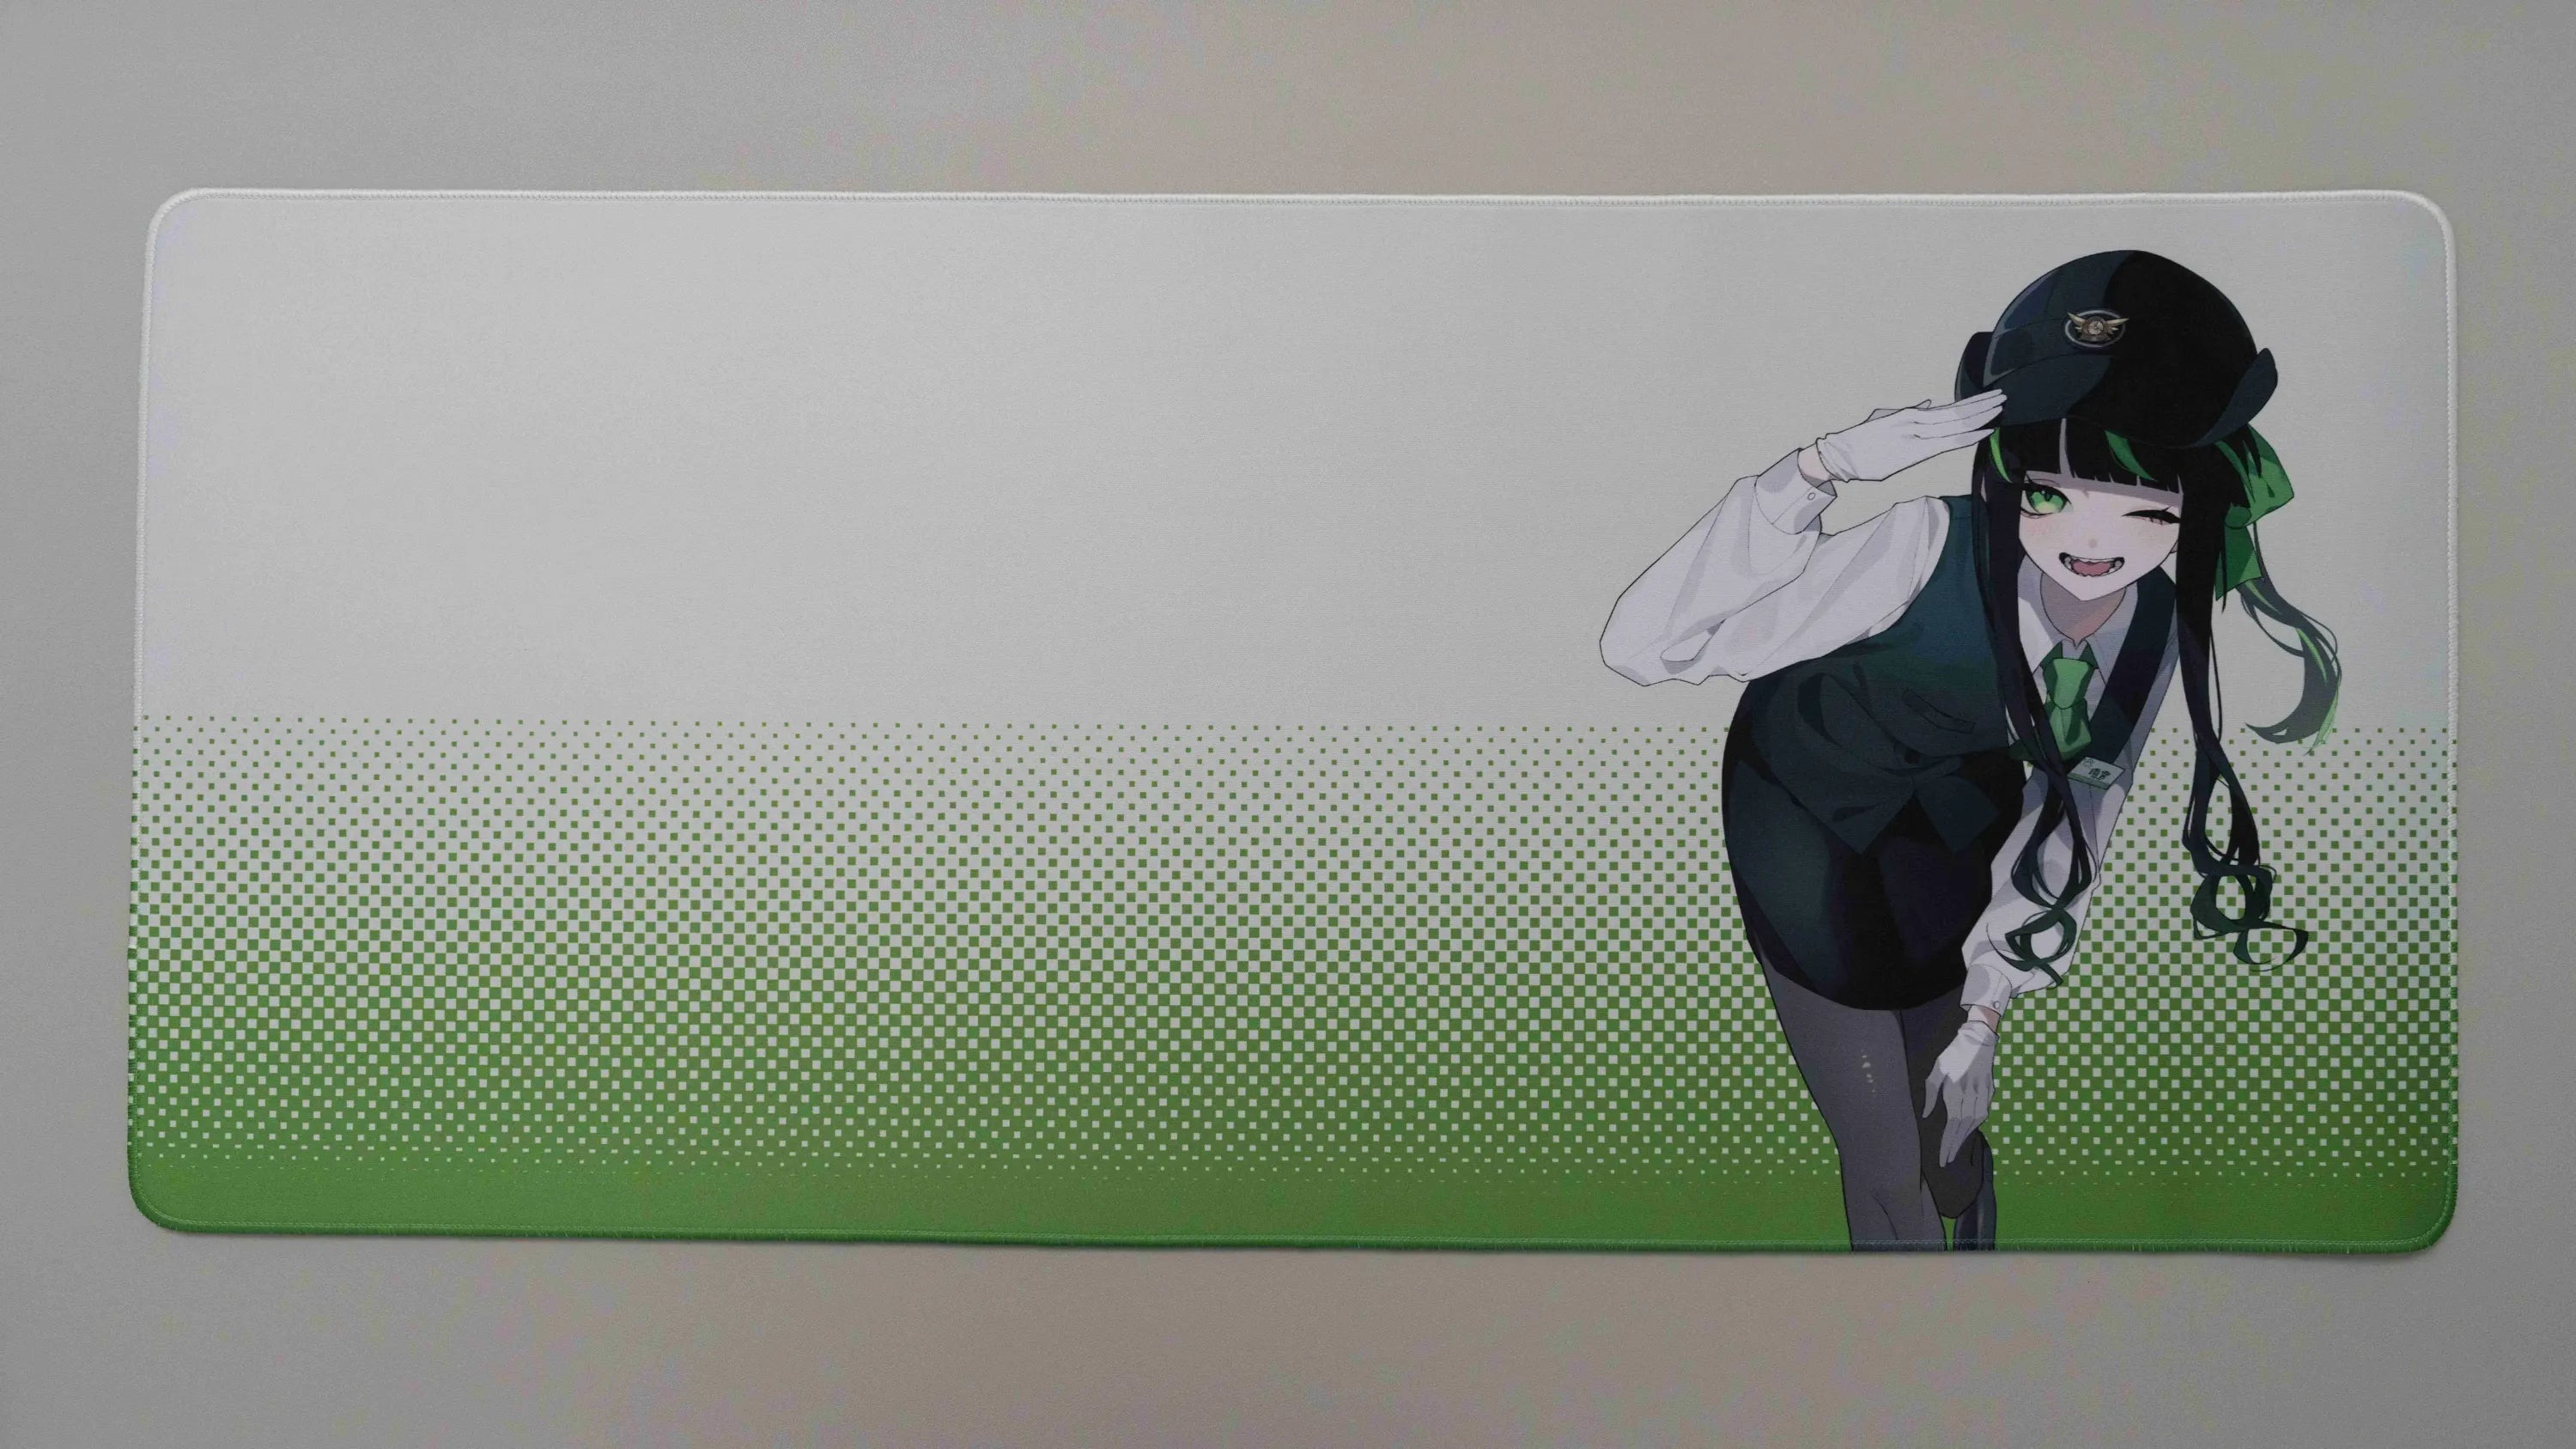 [In Stock] WS Yamanote Line Theme Deskmat